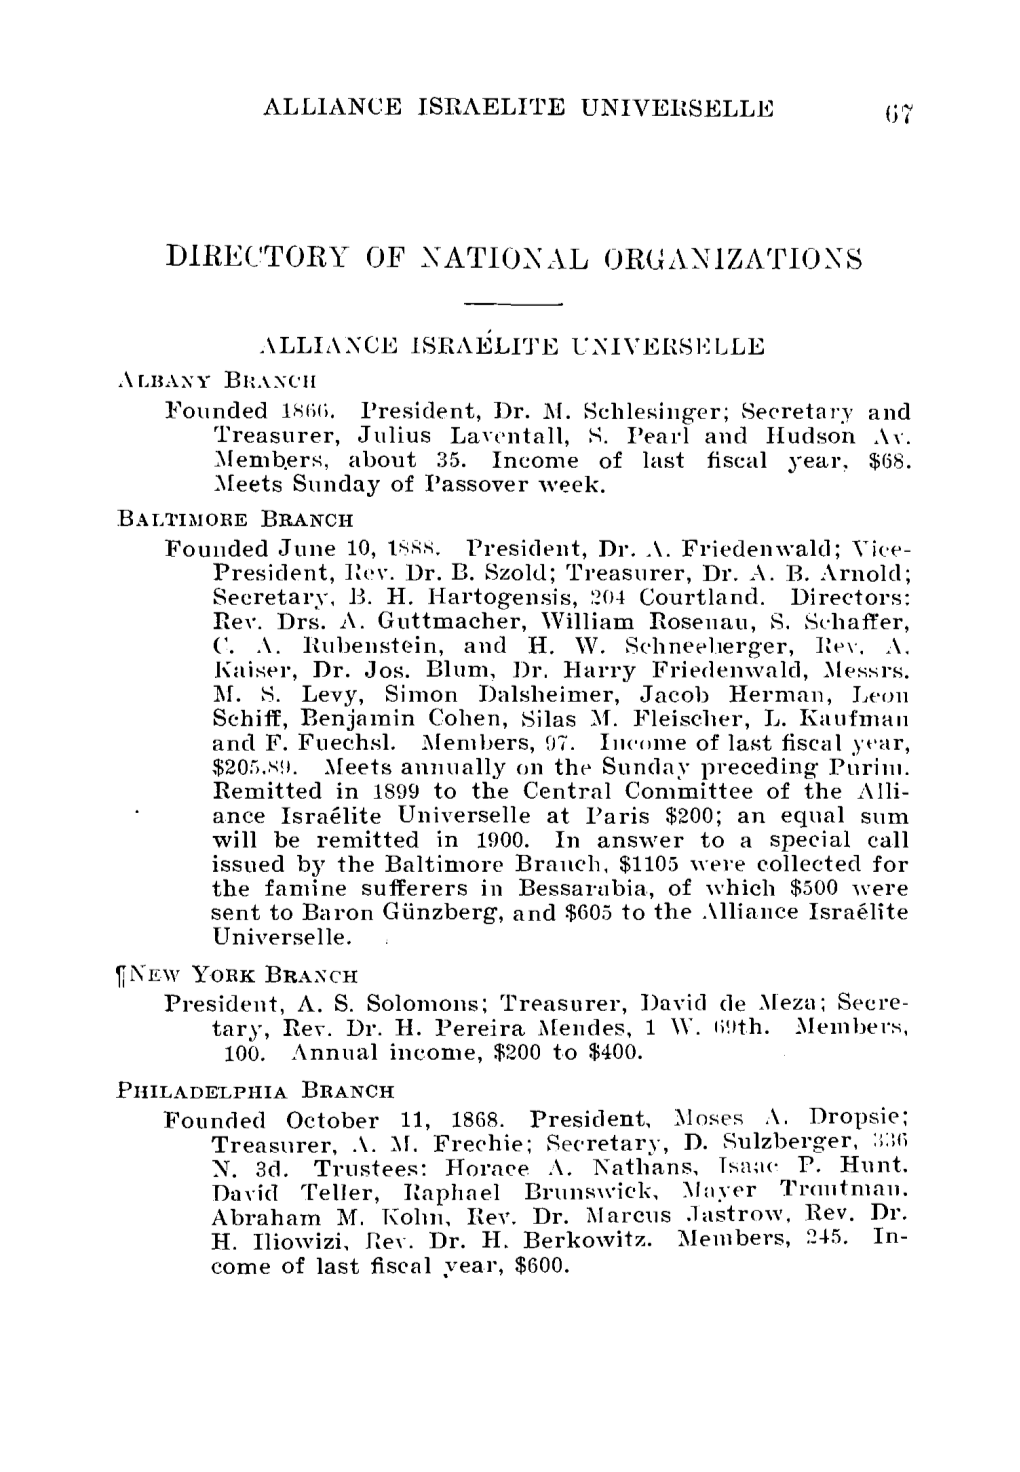 Directory of National Organizations